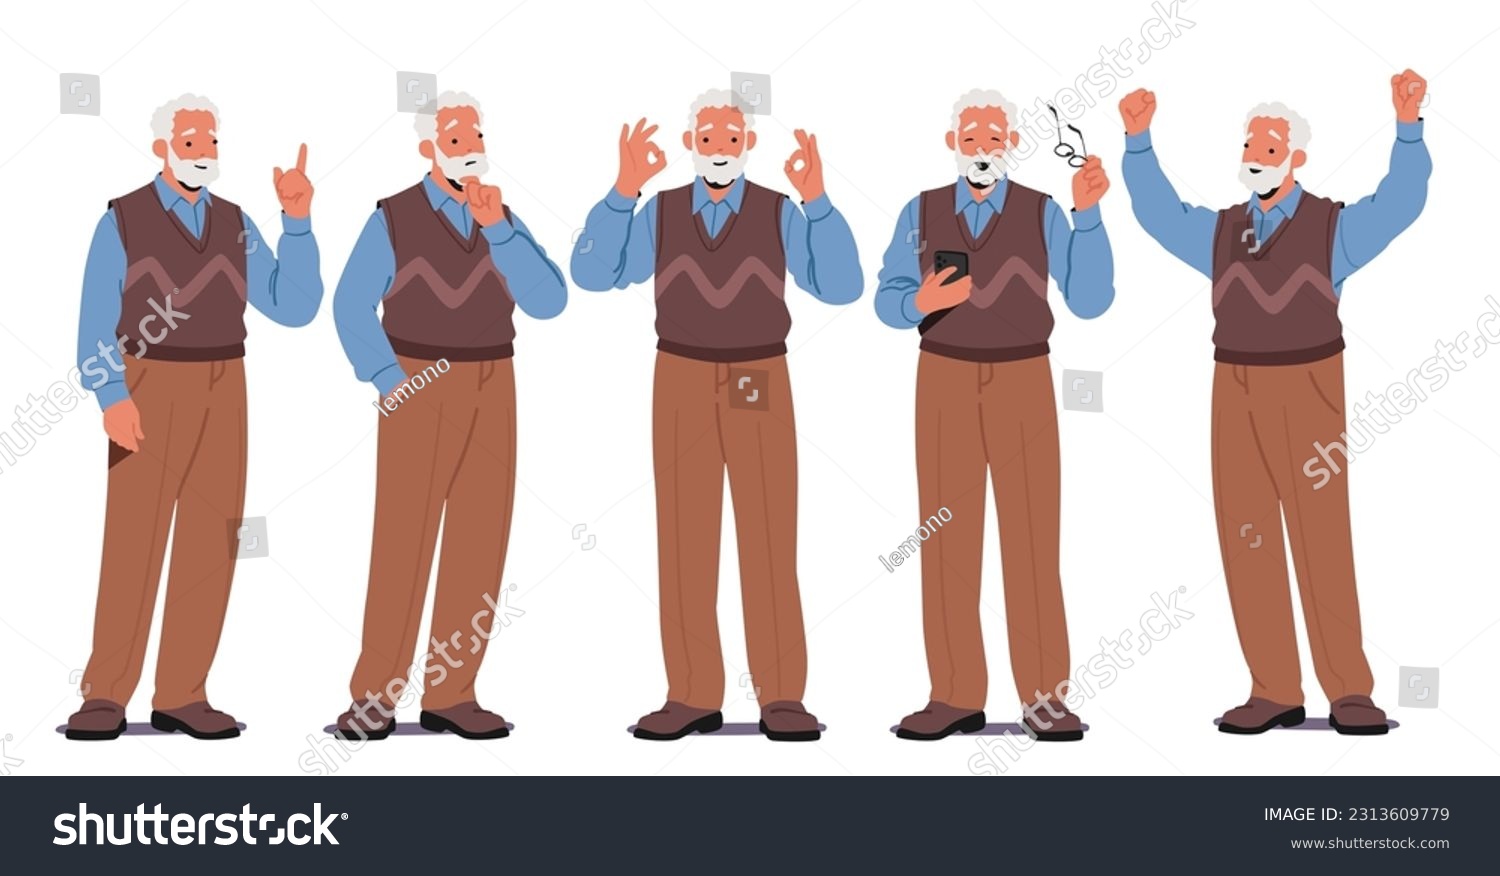 Senior Man Character Displays A Range Of Emotions, Wisdom, Joy, Resilience, Contentment, Contemplation, Through His Expressive Facial Expressions And Body Language. Cartoon People Vector Illustration #2313609779